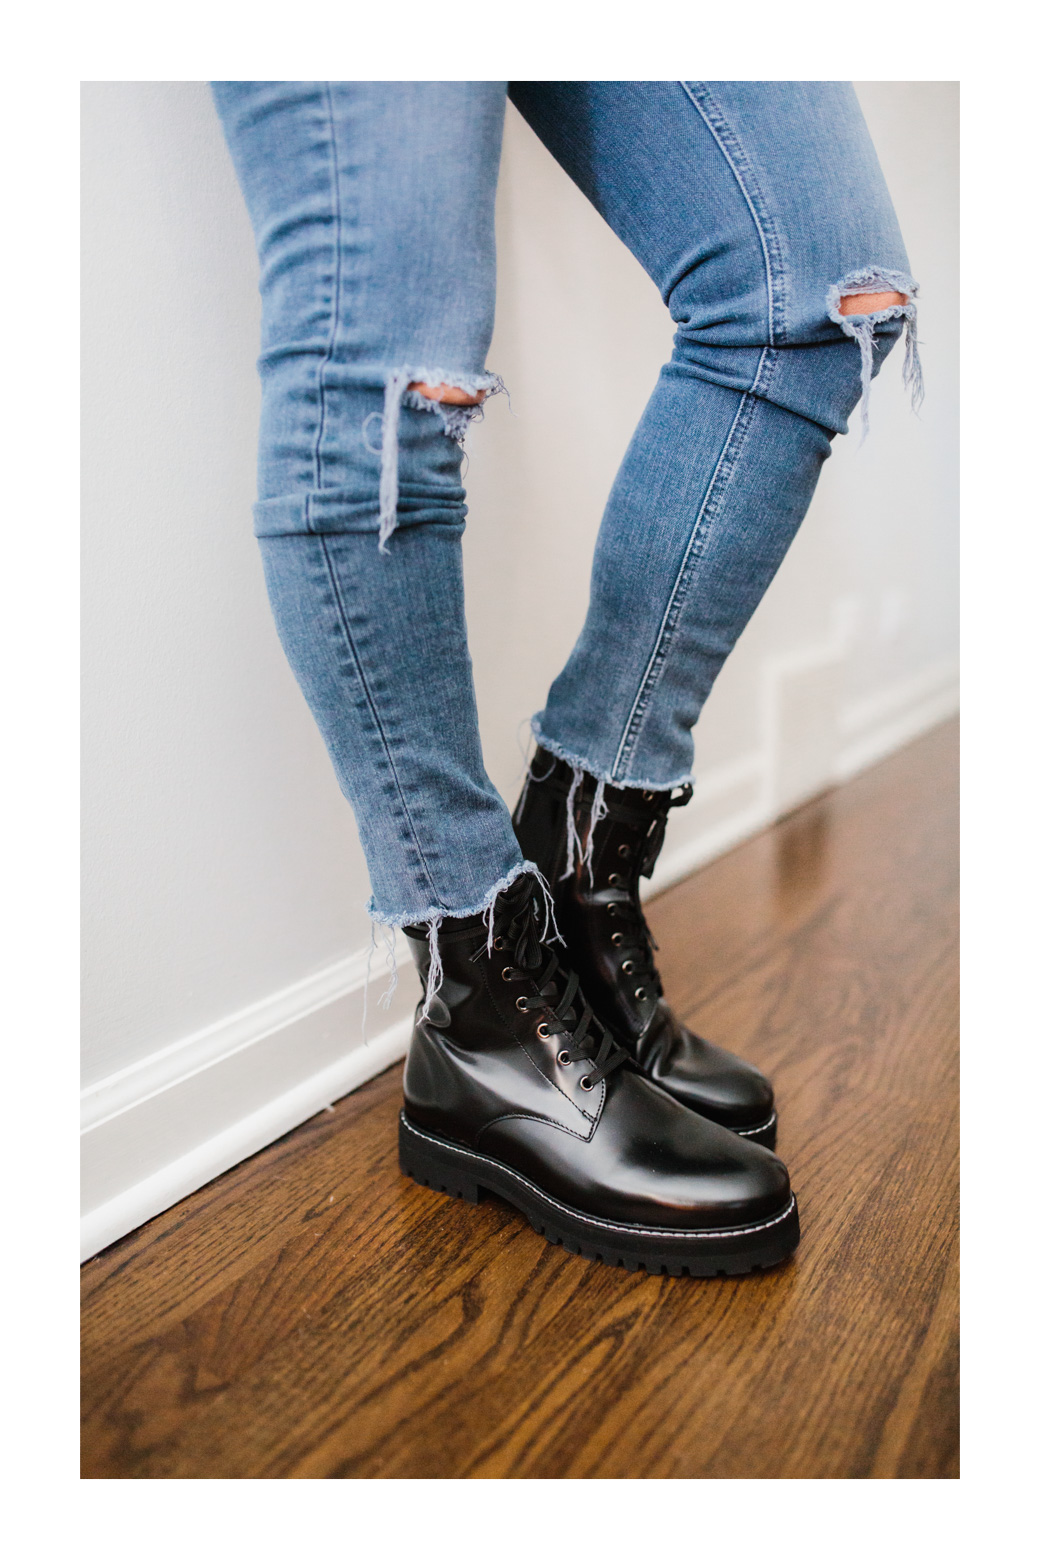 jeans and combat boots